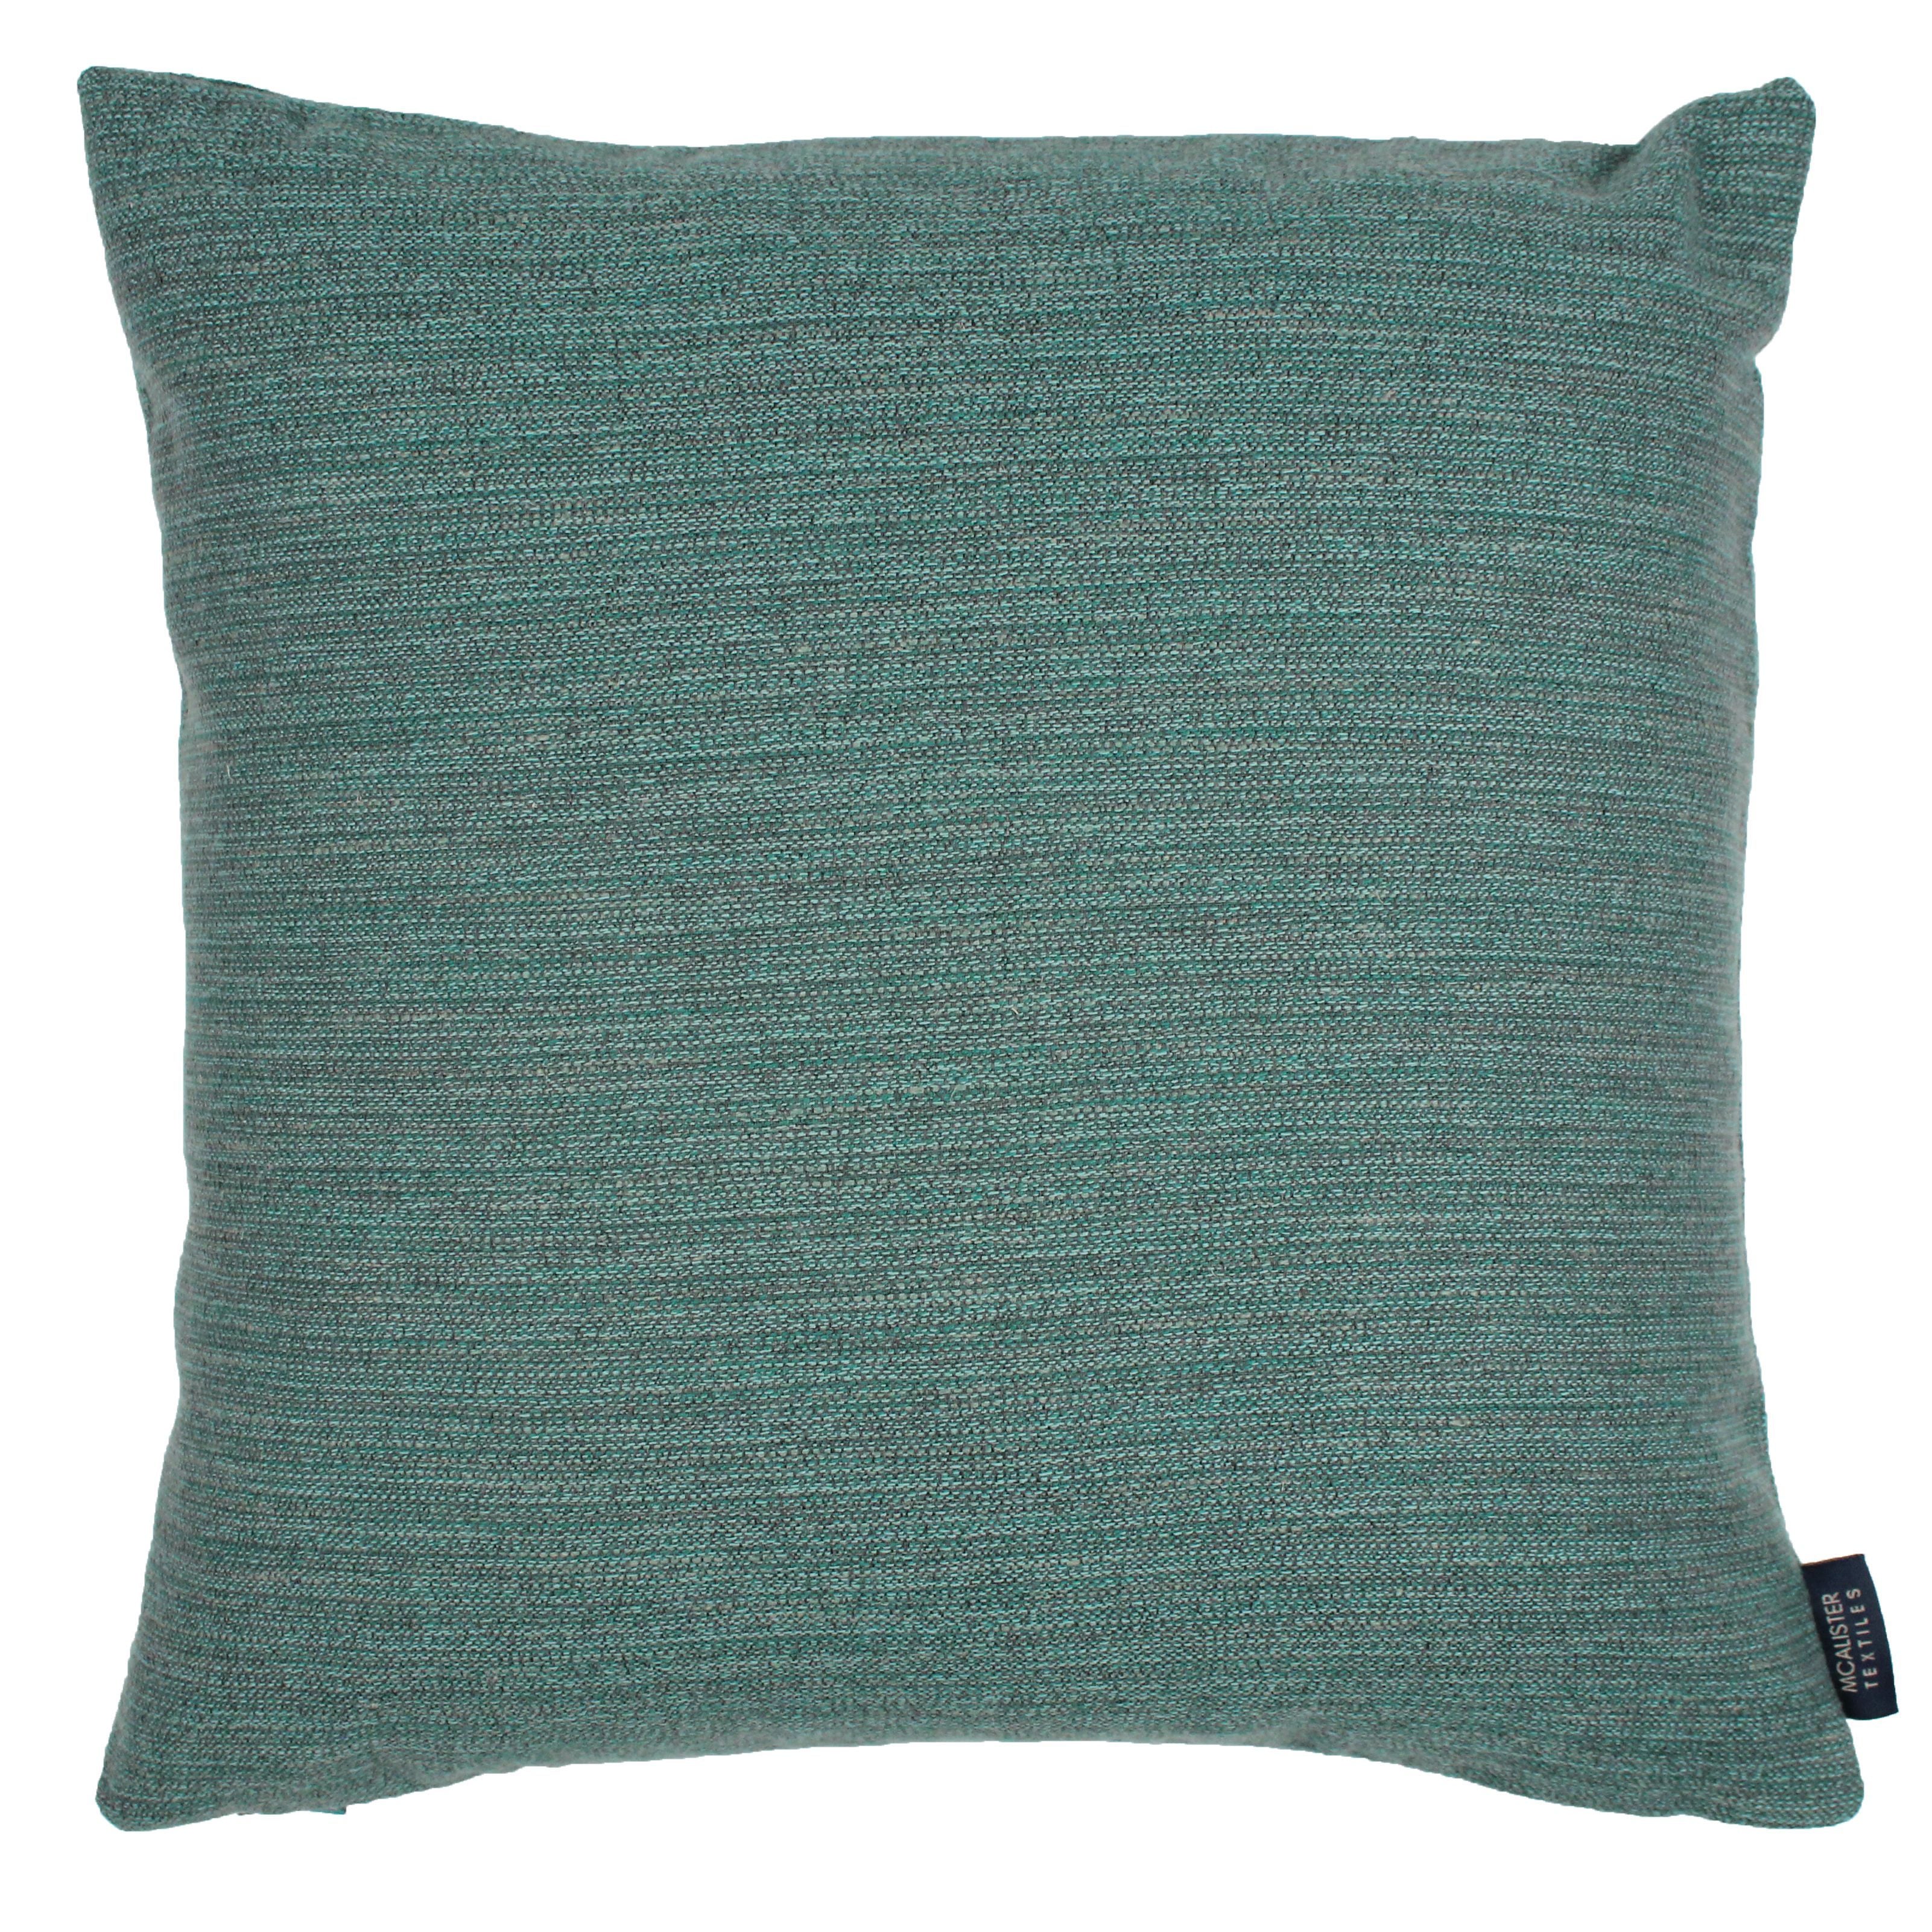 McAlister Textiles Hamleton Teal Textured Plain Cushion Cushions and Covers Cover Only 43cm x 43cm 